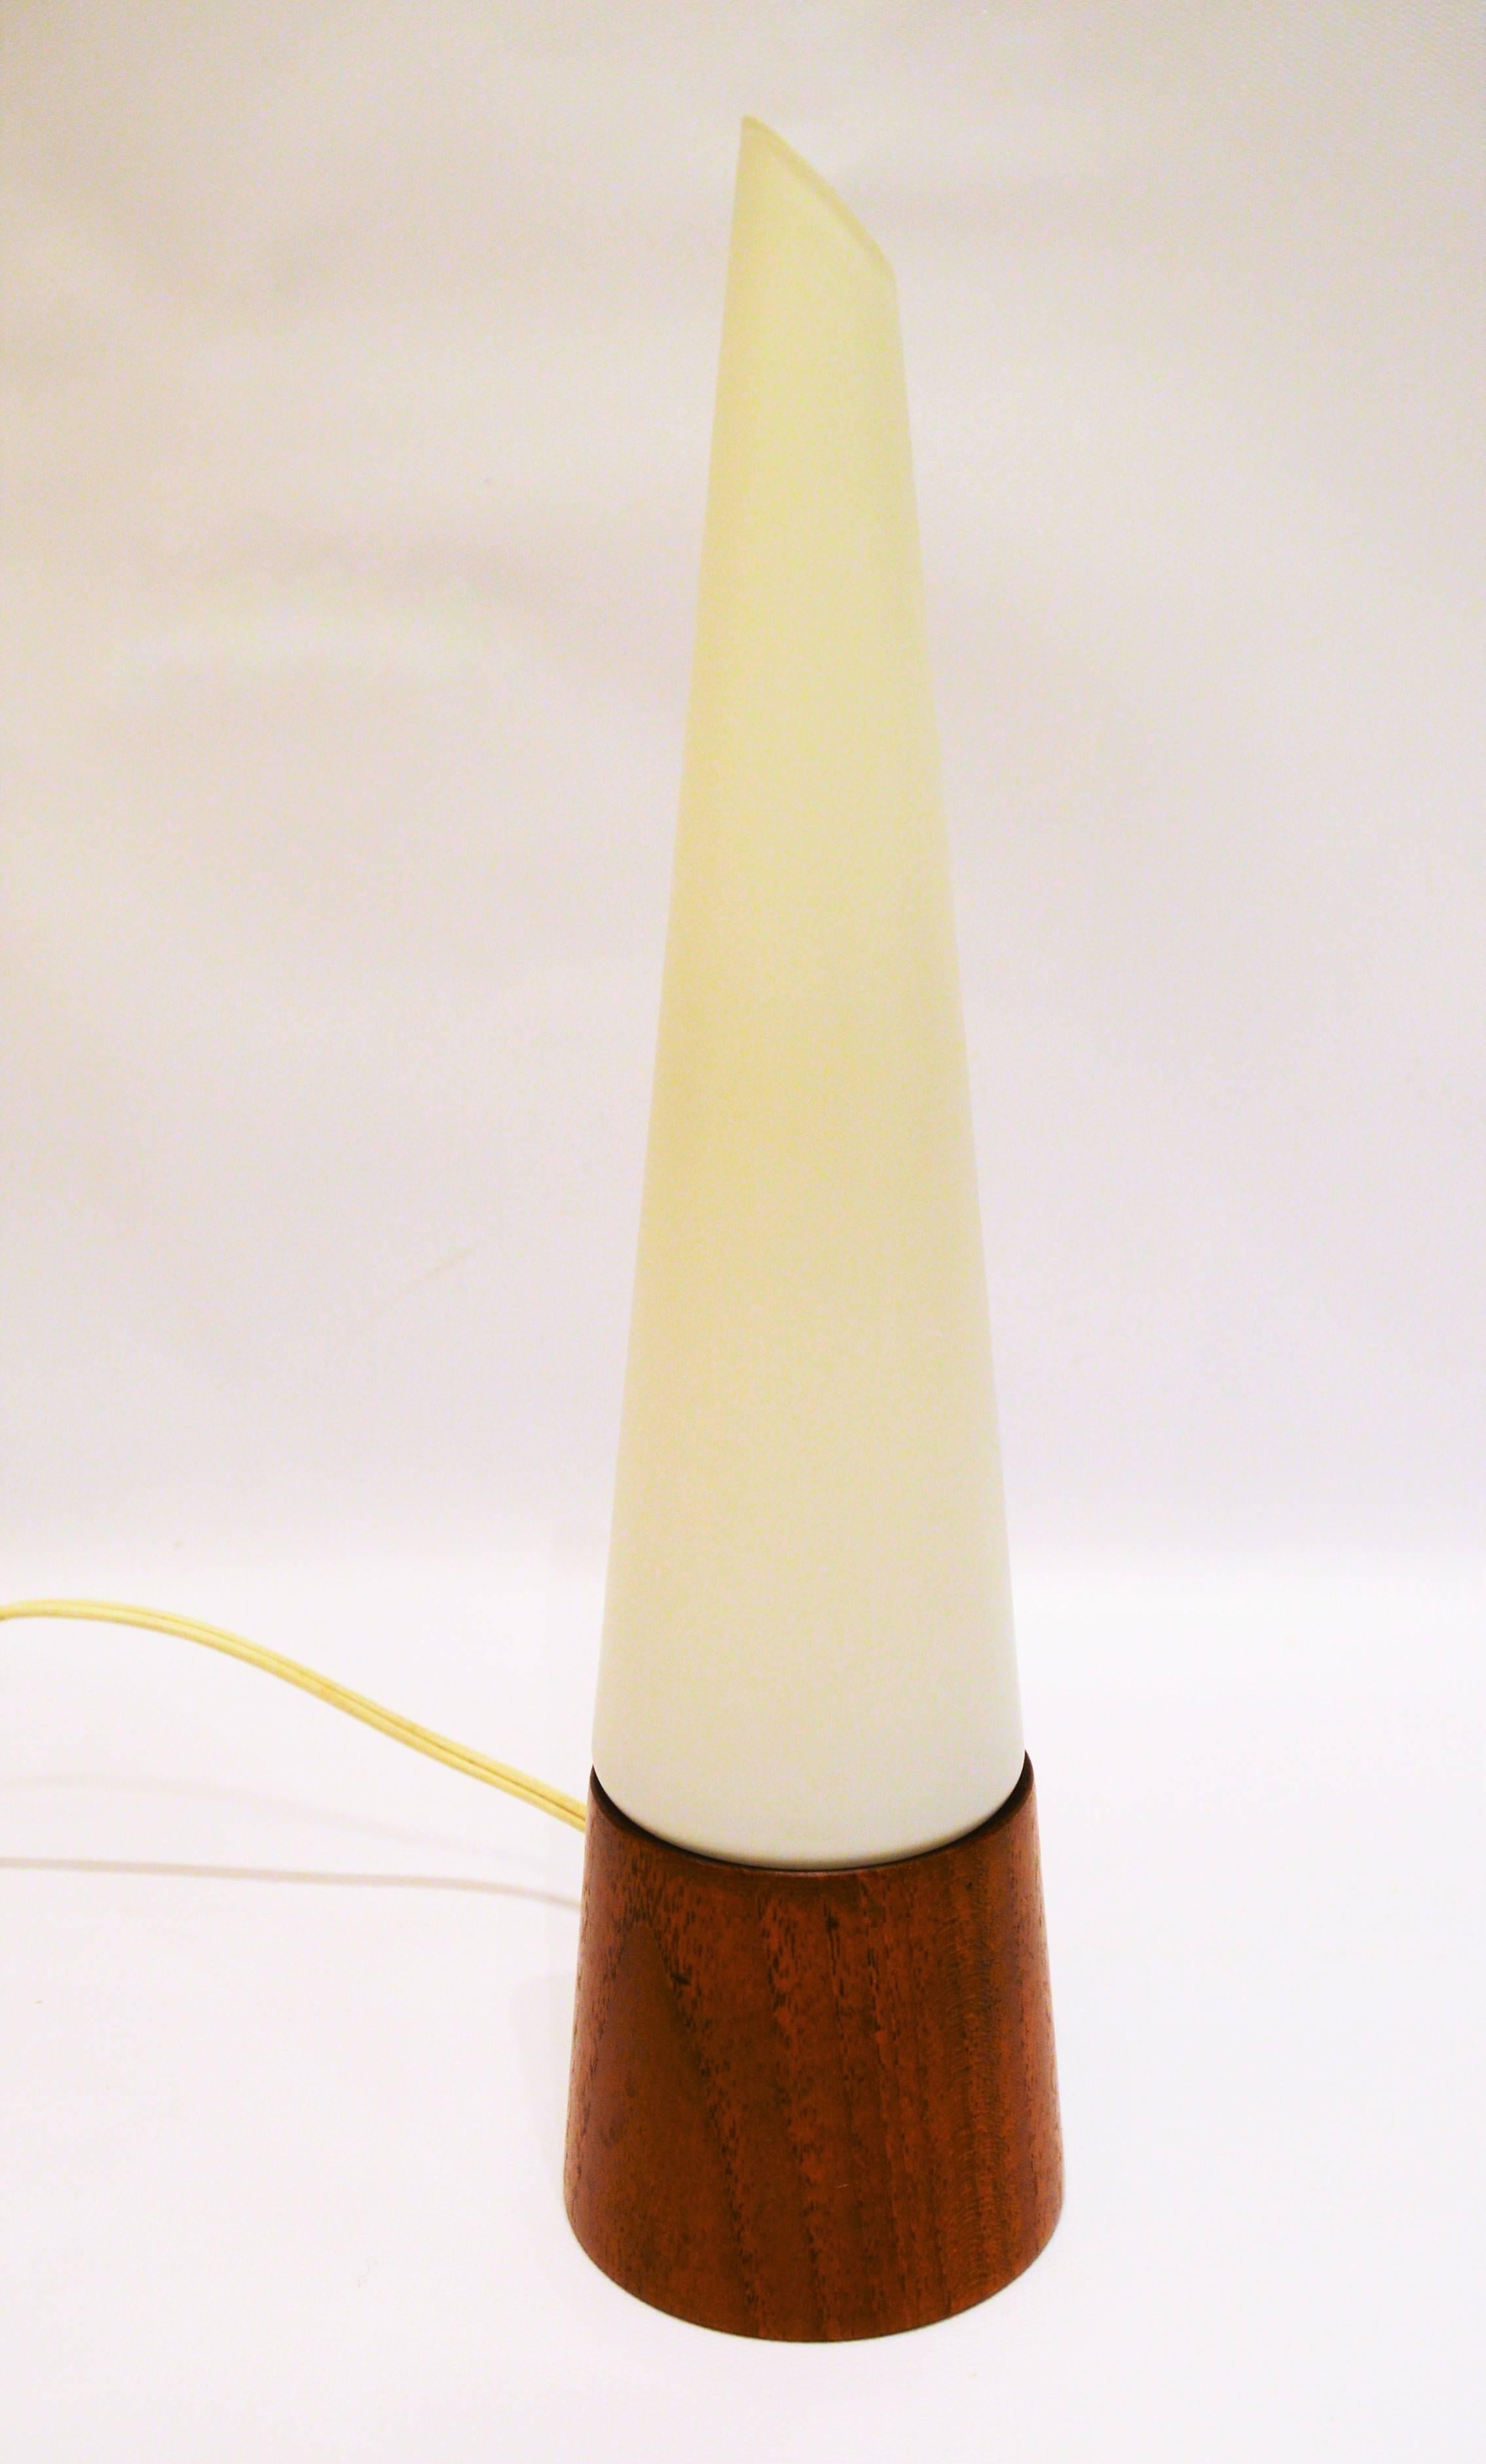 This delightful Atomic influenced conical teak and frosted white glass lamp may be small but packs a big bang for it's size. Likely designed by Holm Sorensen in terms of design, though I couldn't find another like it on line. The base is teak and